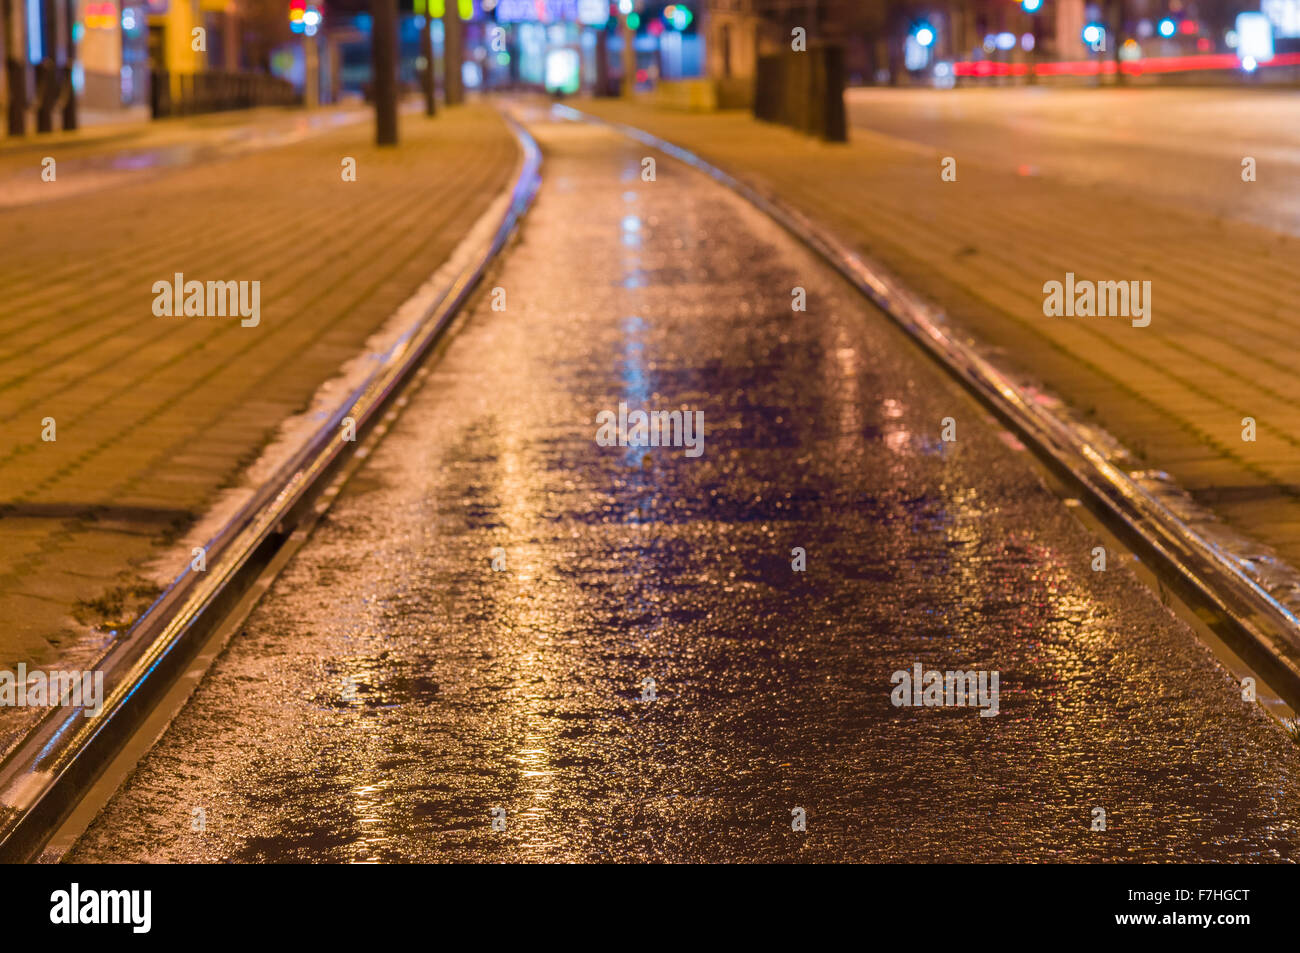 Tram rail track wet and shiny by night lights, blurred city background Stock Photo